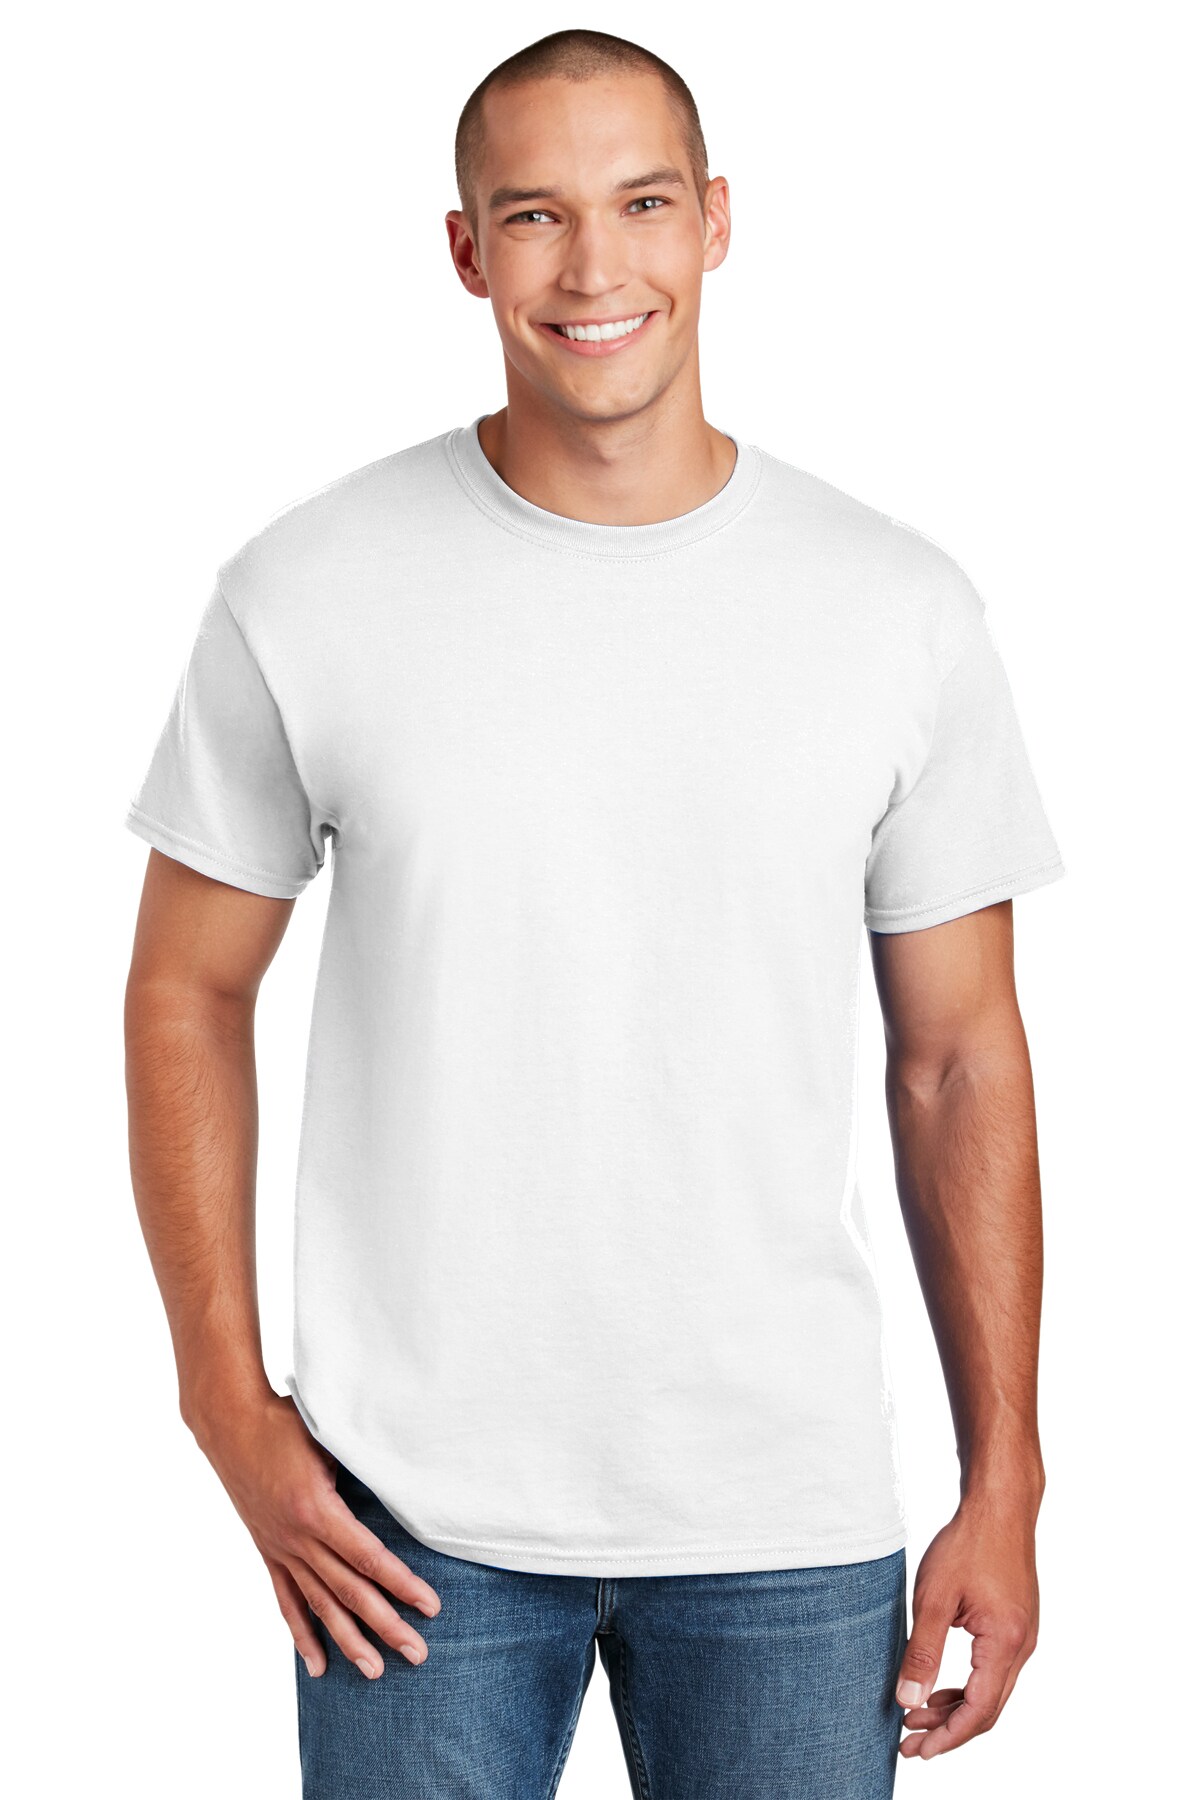 Premium Men's T-Shirt, 50/50 Cotton/Poly Tee, Classic, Wardrobe  Essential, Casual Wear, Comfortable, and Versatile Men's Clothing-Your New  Go-To for Every Outfit, RADYAN®